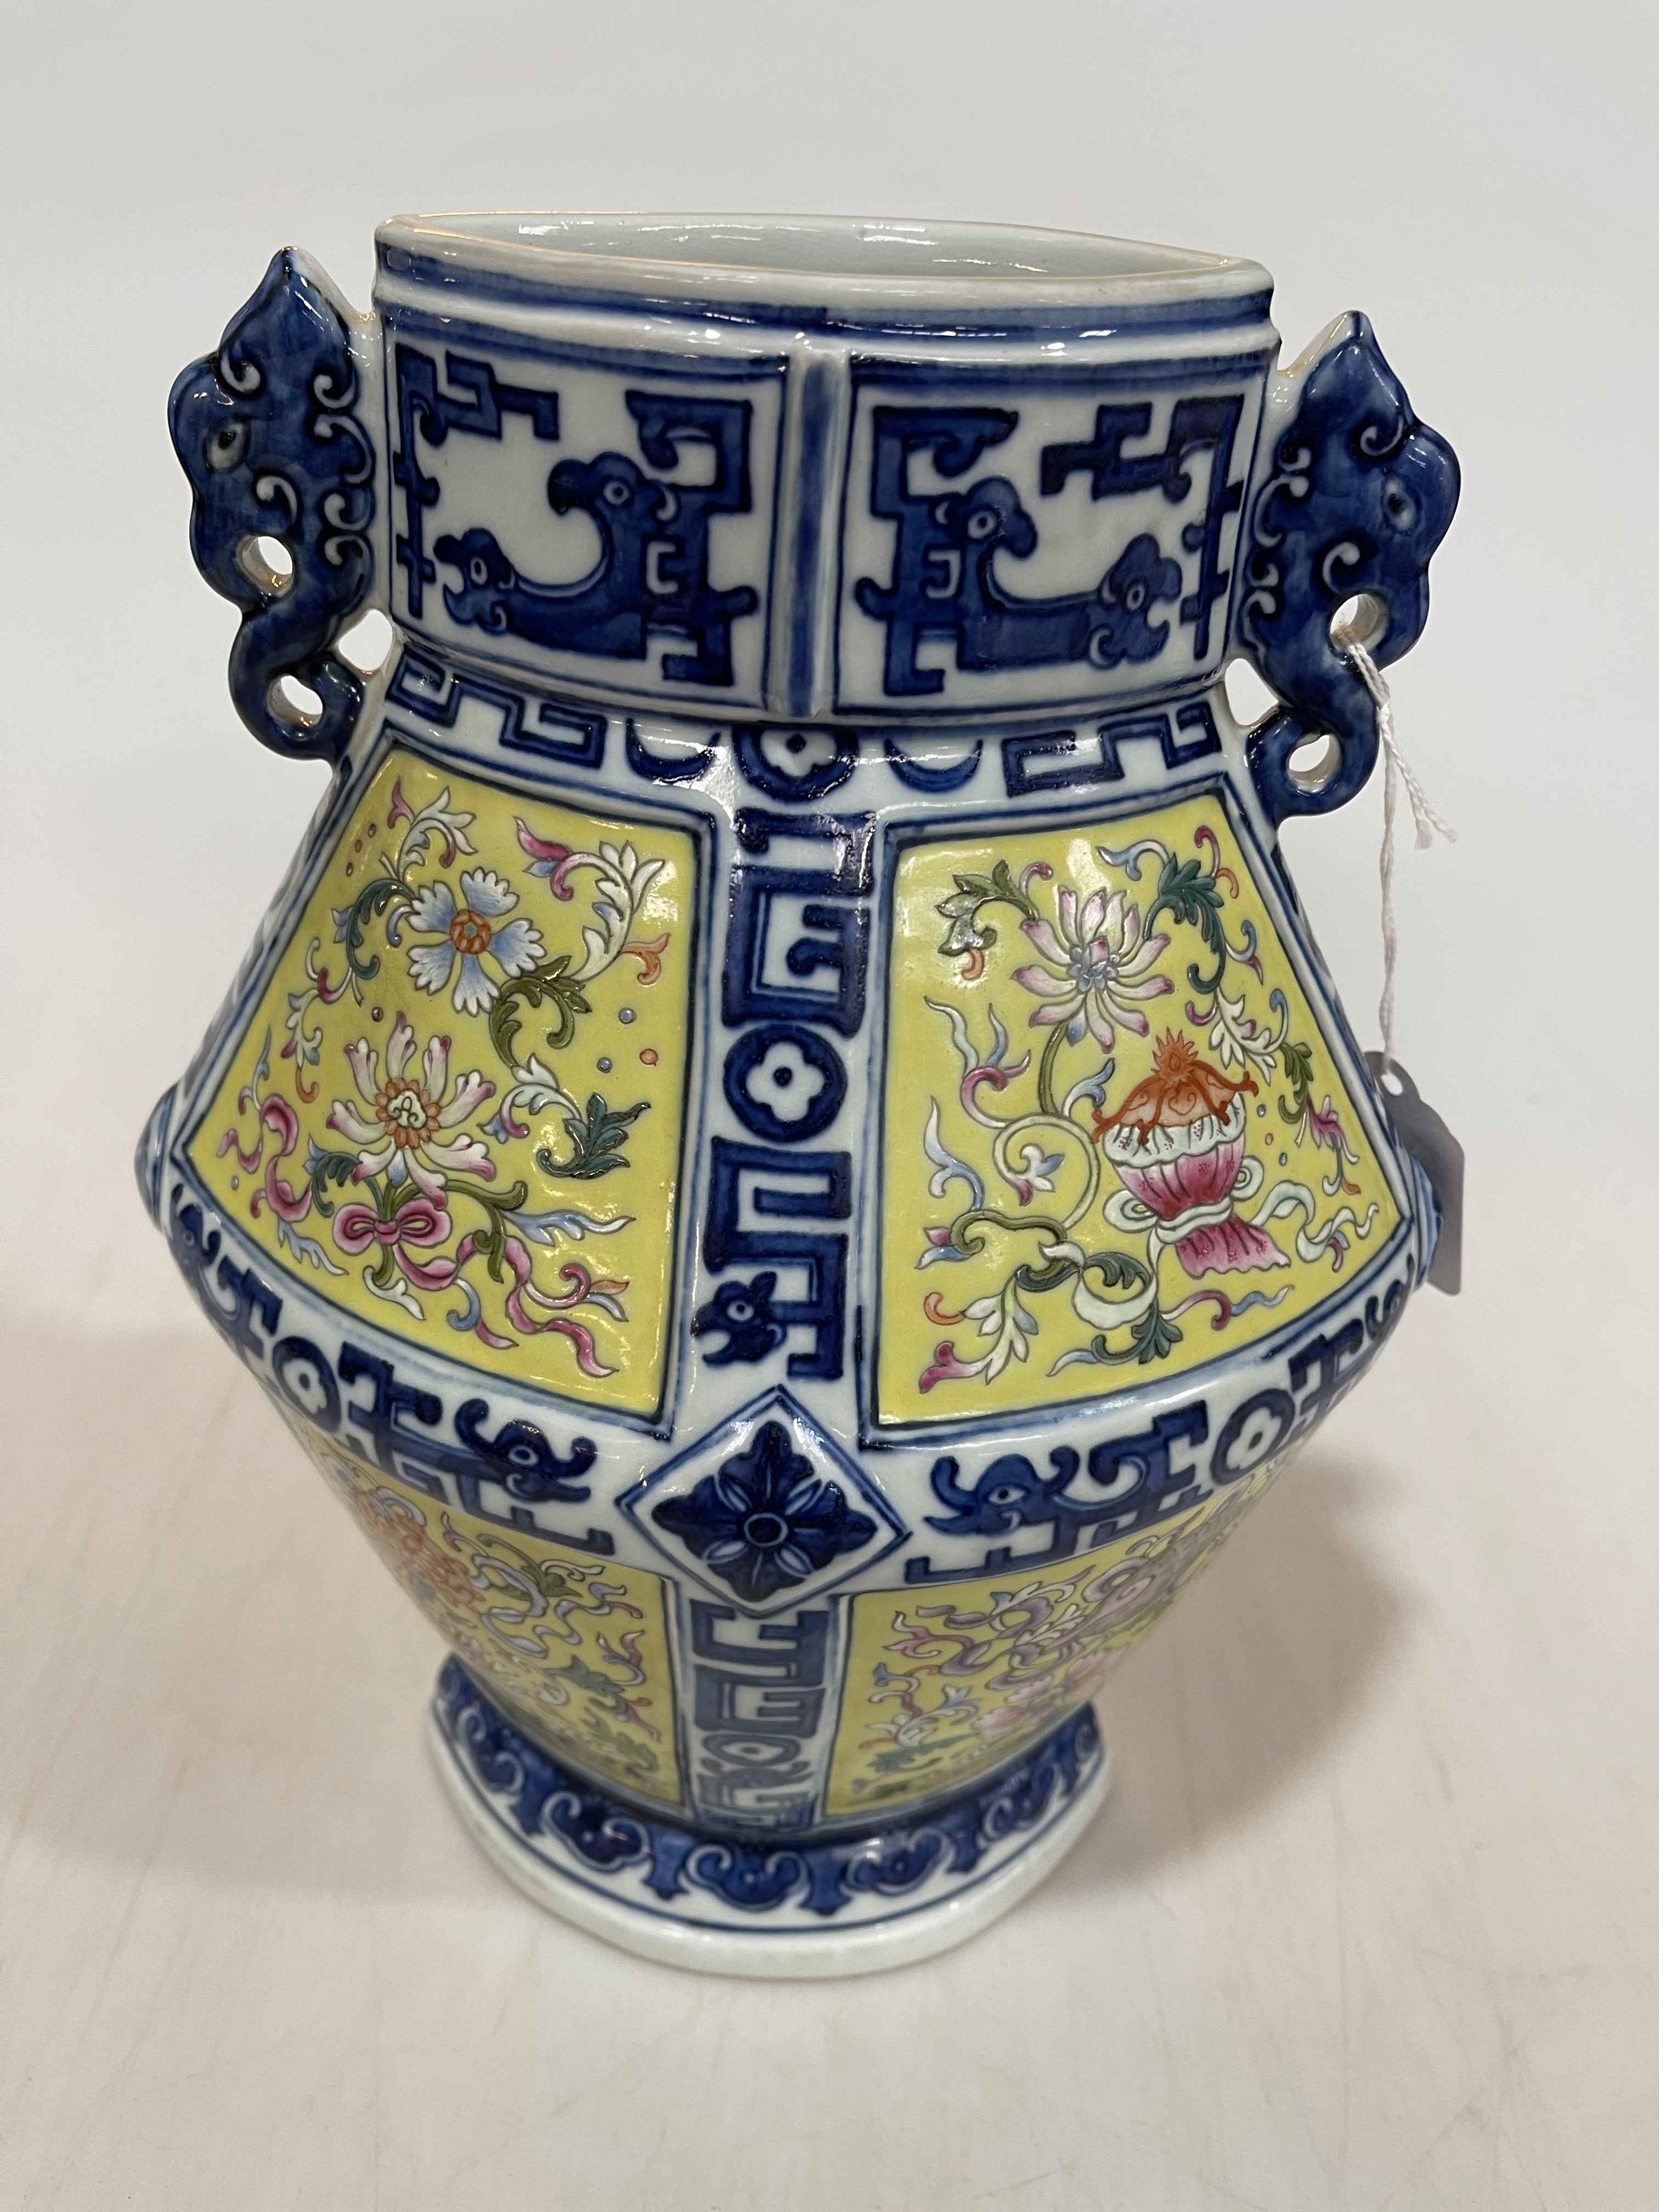 Good Chinese porcelain vase with famille rose on yellow panels and blue and white borders,